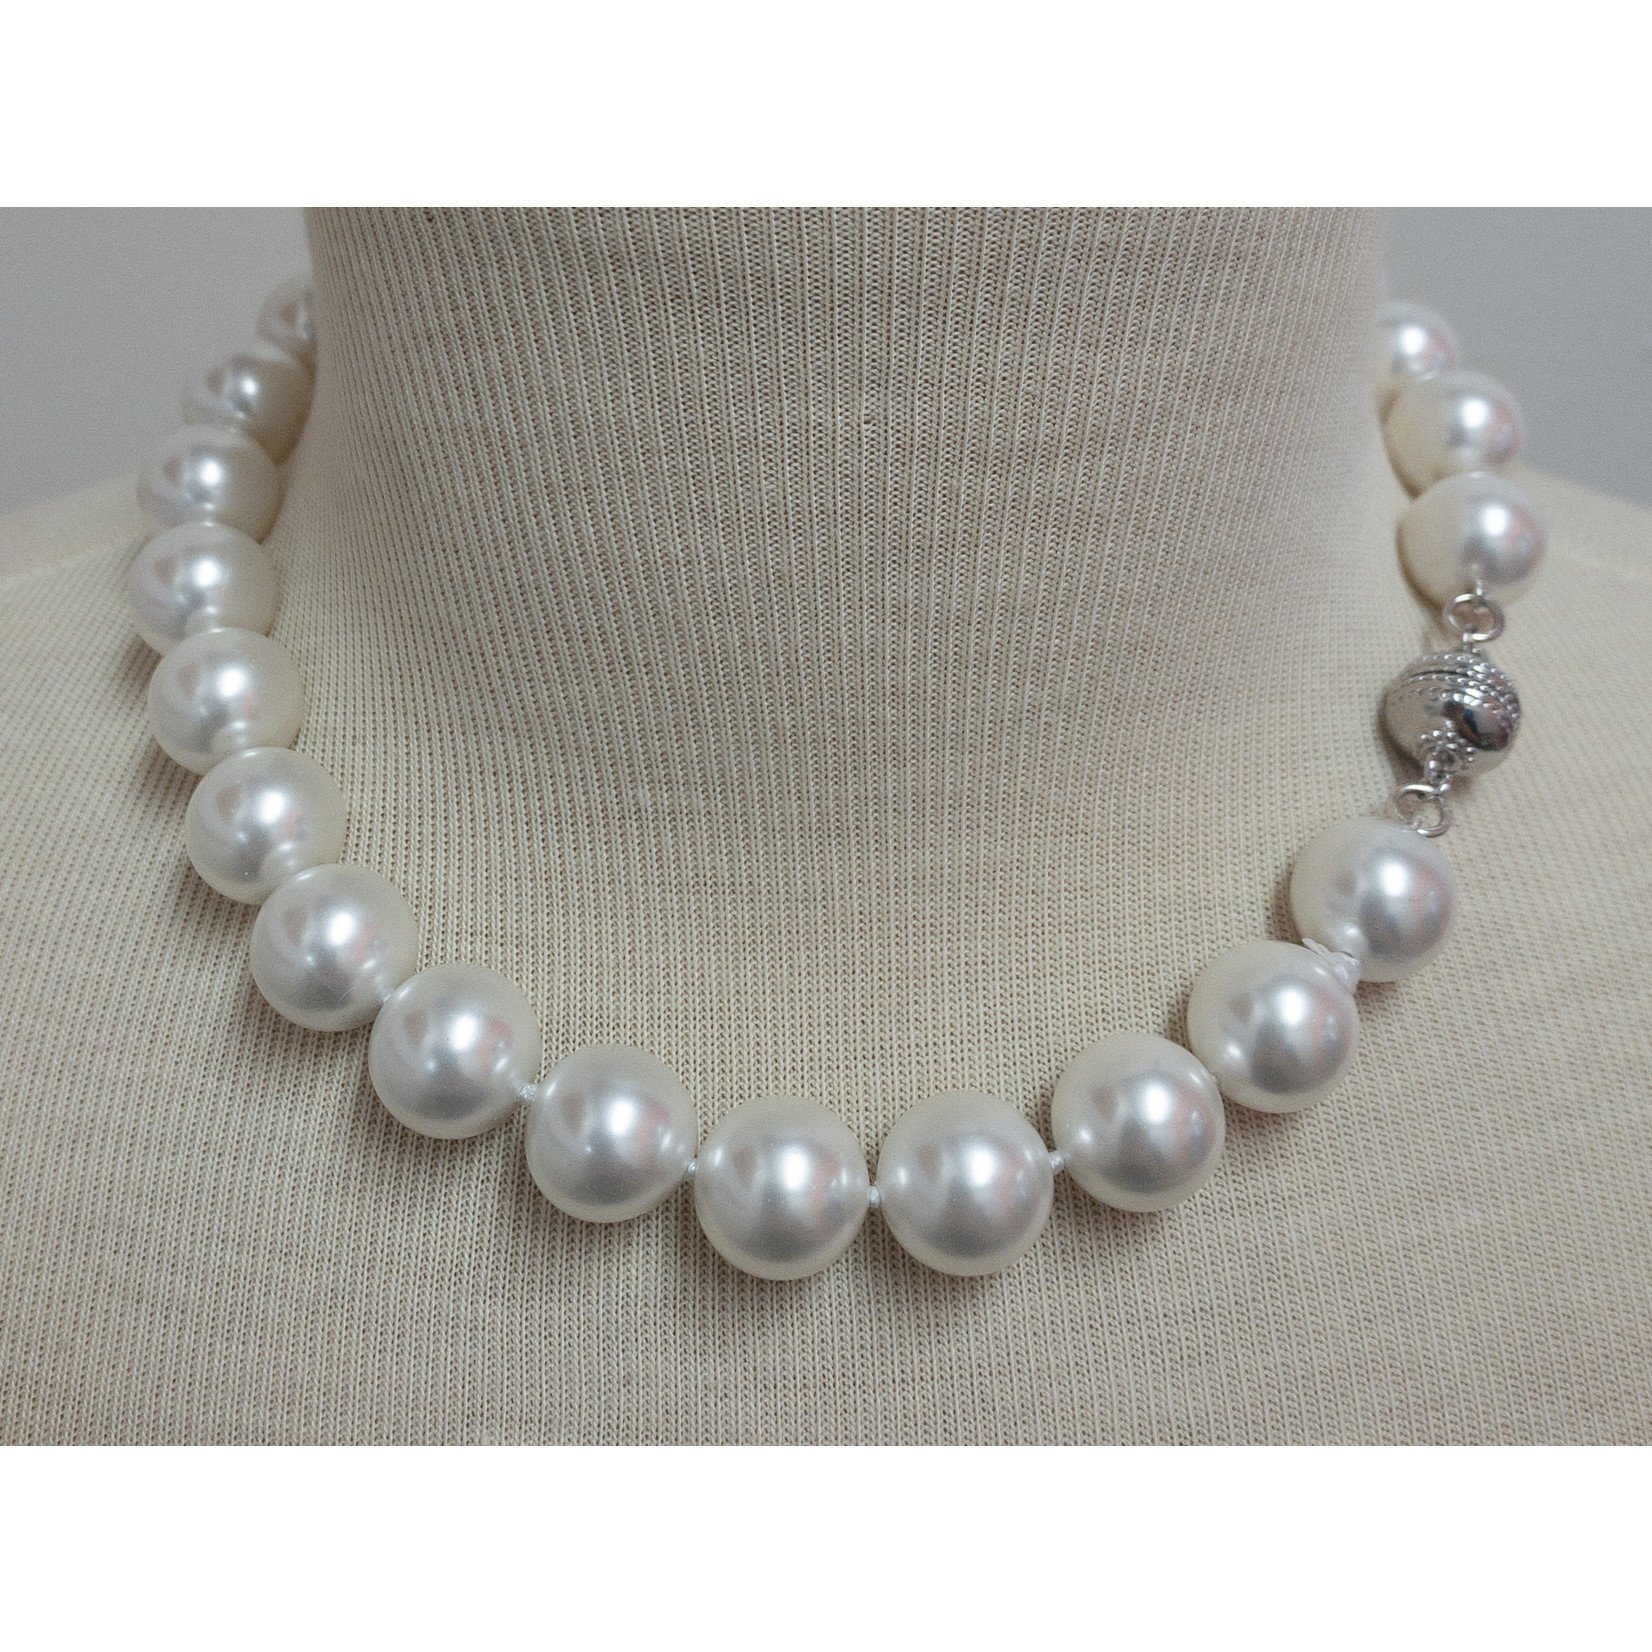 Casuals Fairhope 16 Pearl Necklace with Silver Magnetic Clasp - M